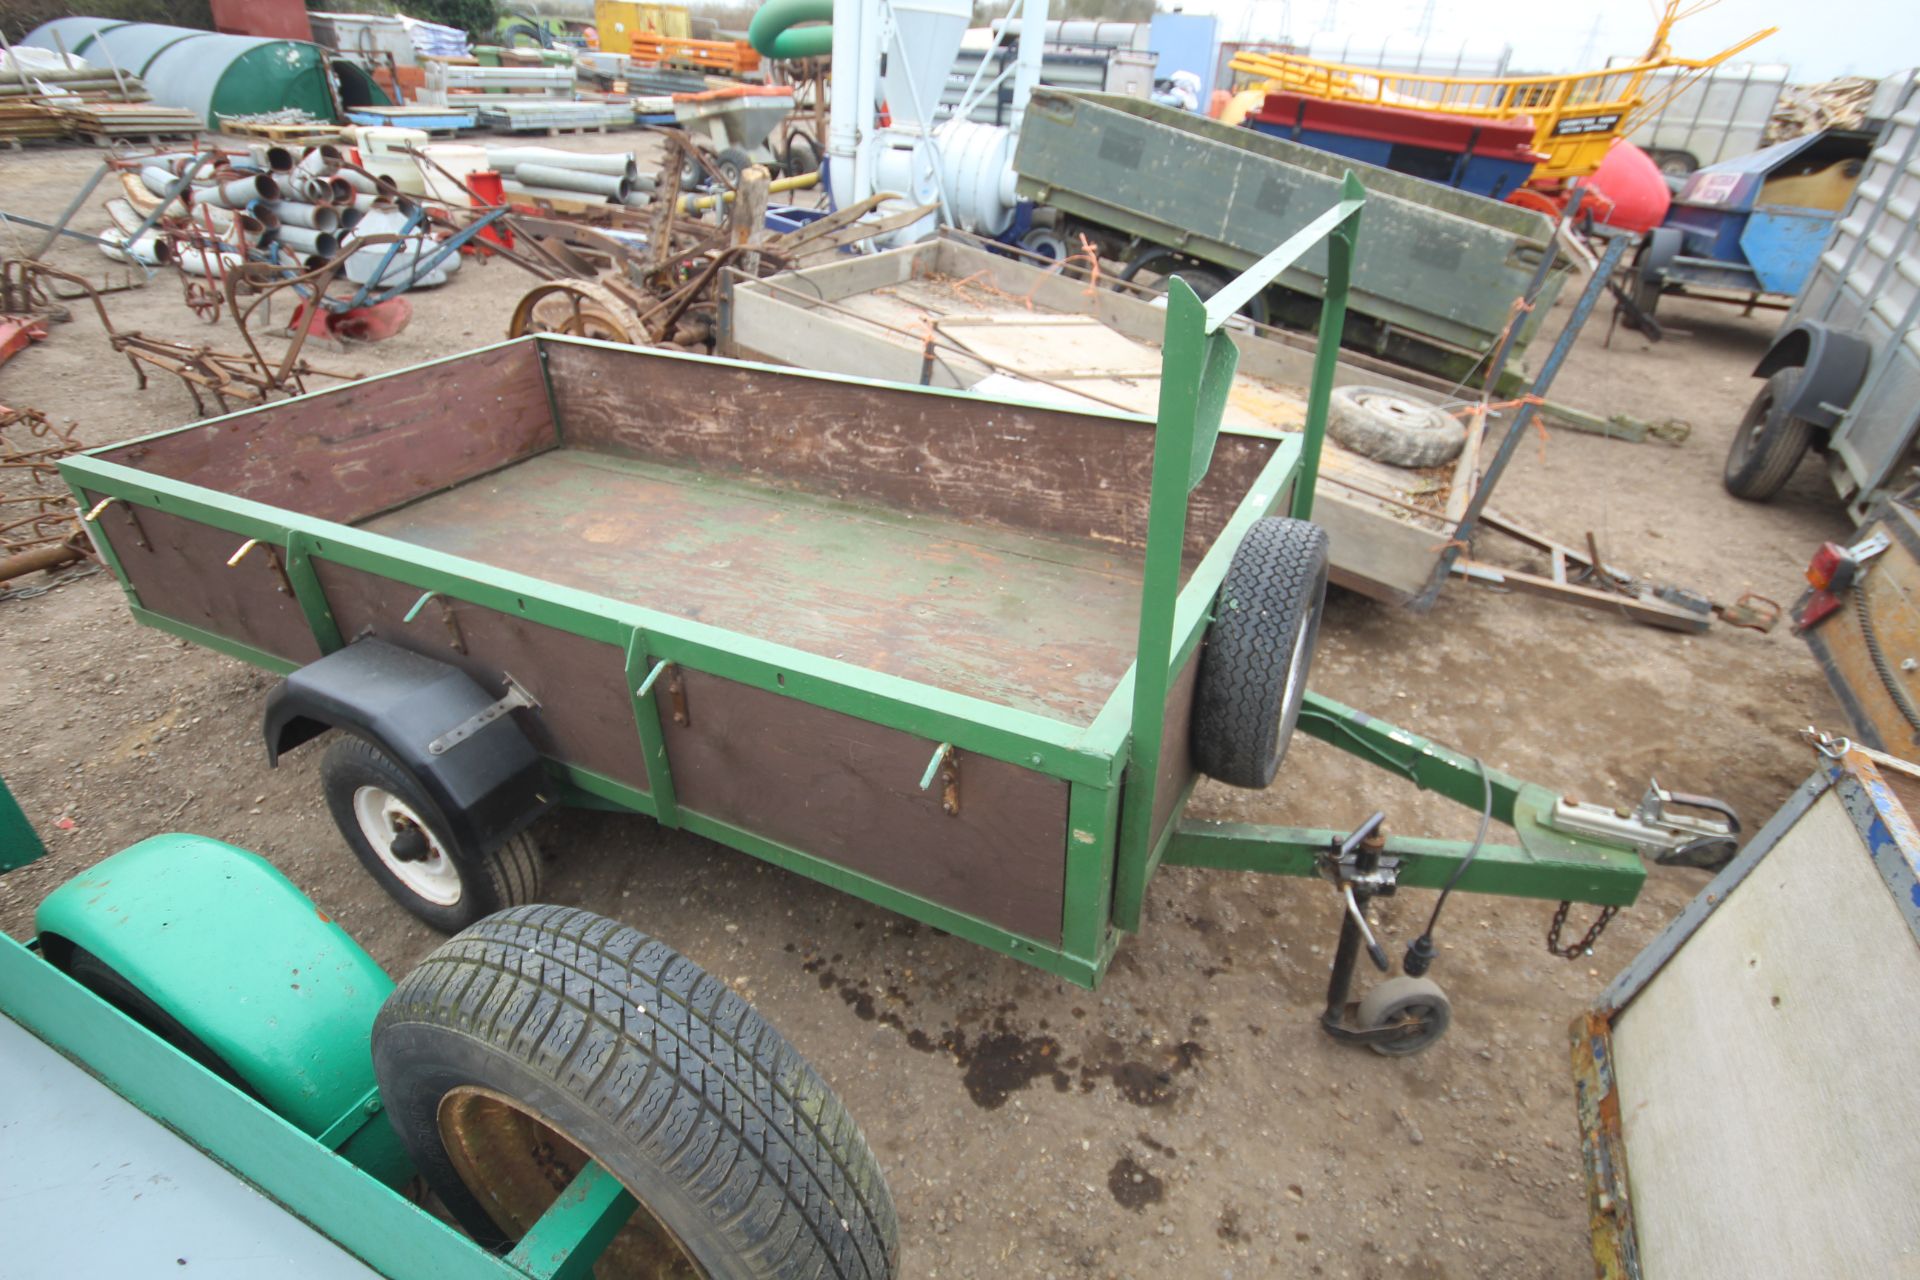 8ft x 4ft single axle car trailer. With ladder rack, lights and spare wheel. Key held.